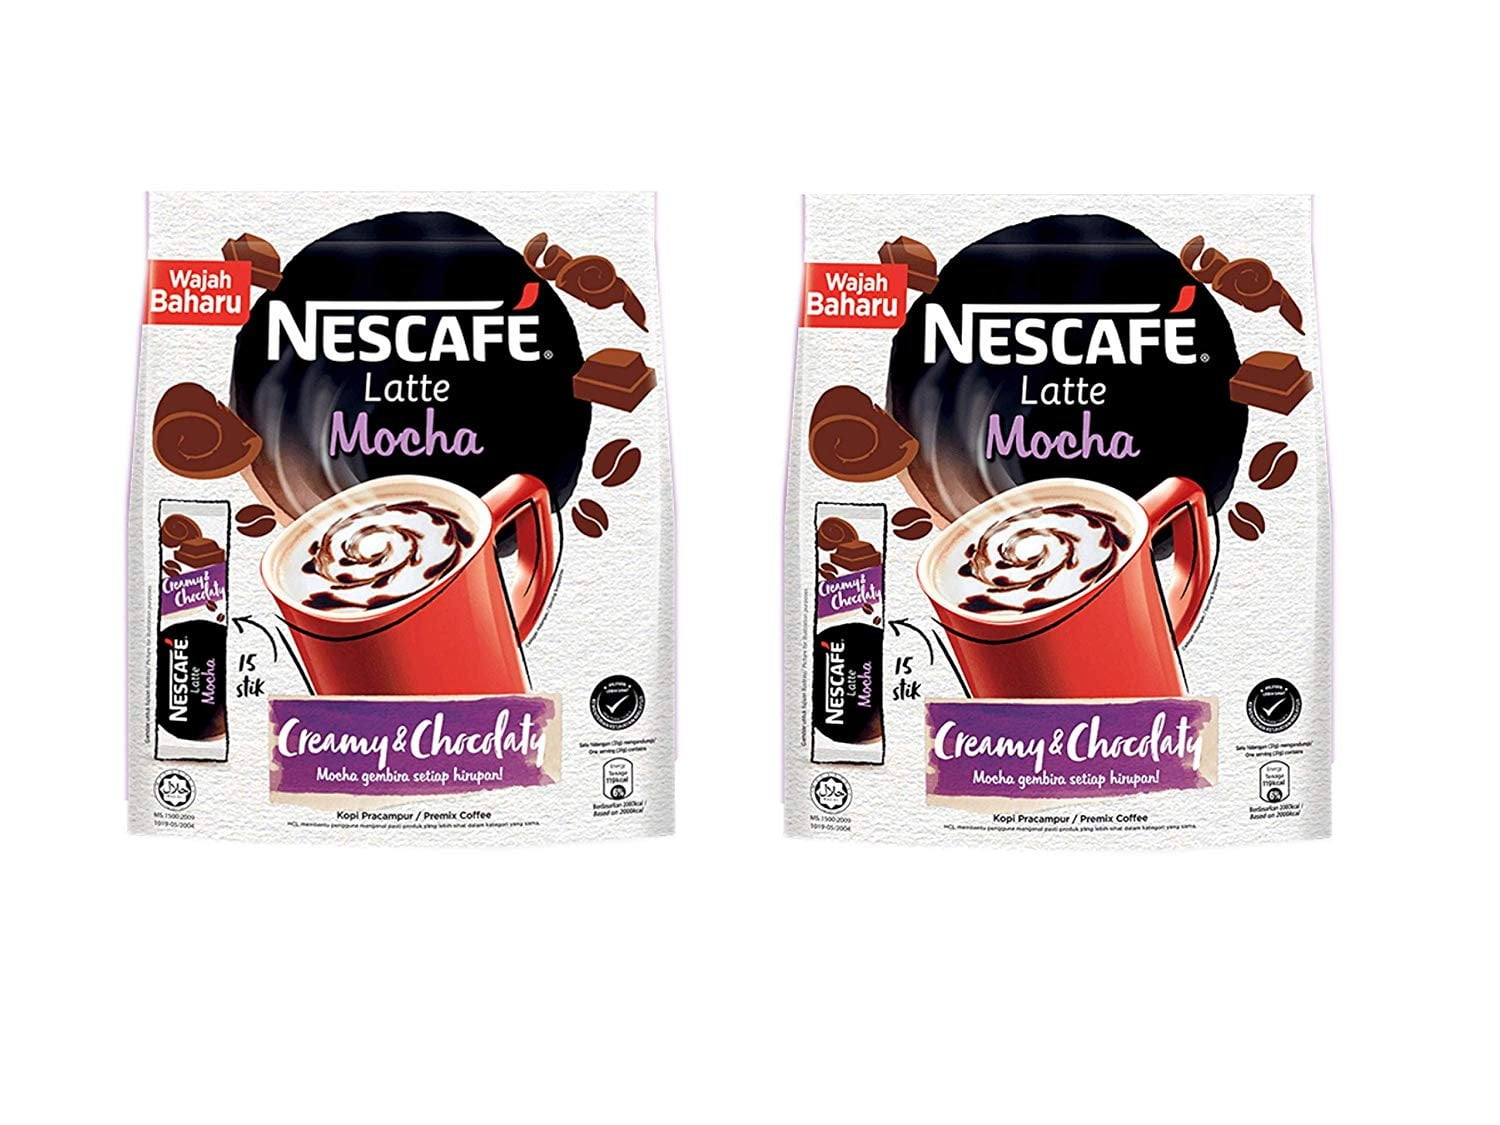 Nescafe 3 in 1 (CLASSIC) Instant Coffee Mix 30 Sachet – Buy For Less